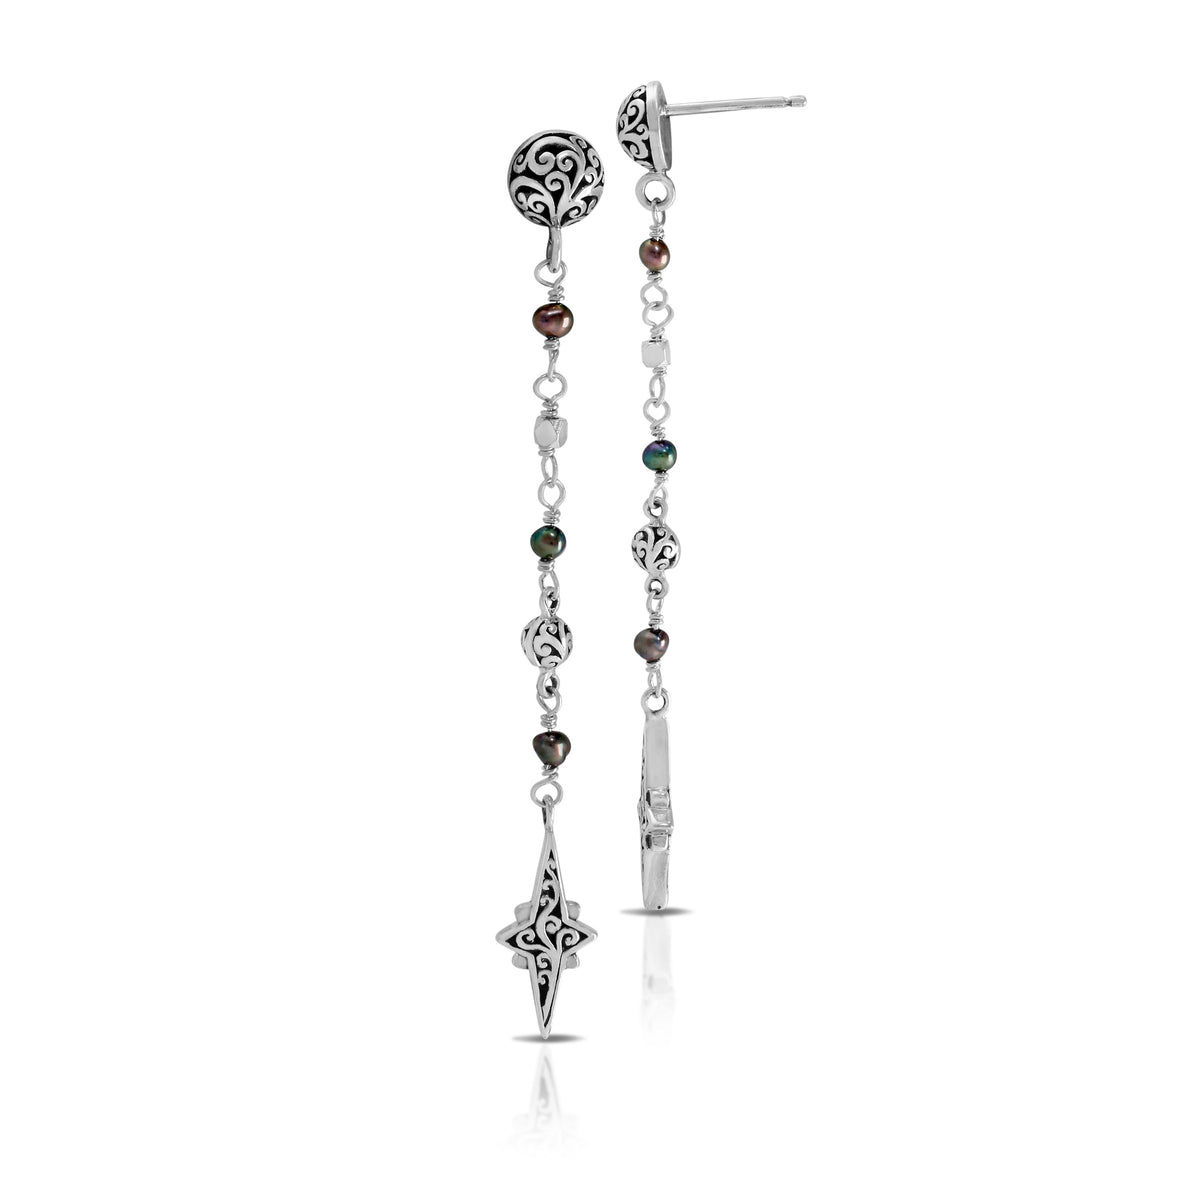 Peacock Pearl Beads (3mm) & LH Scroll Beads With Starbright Drop Earring